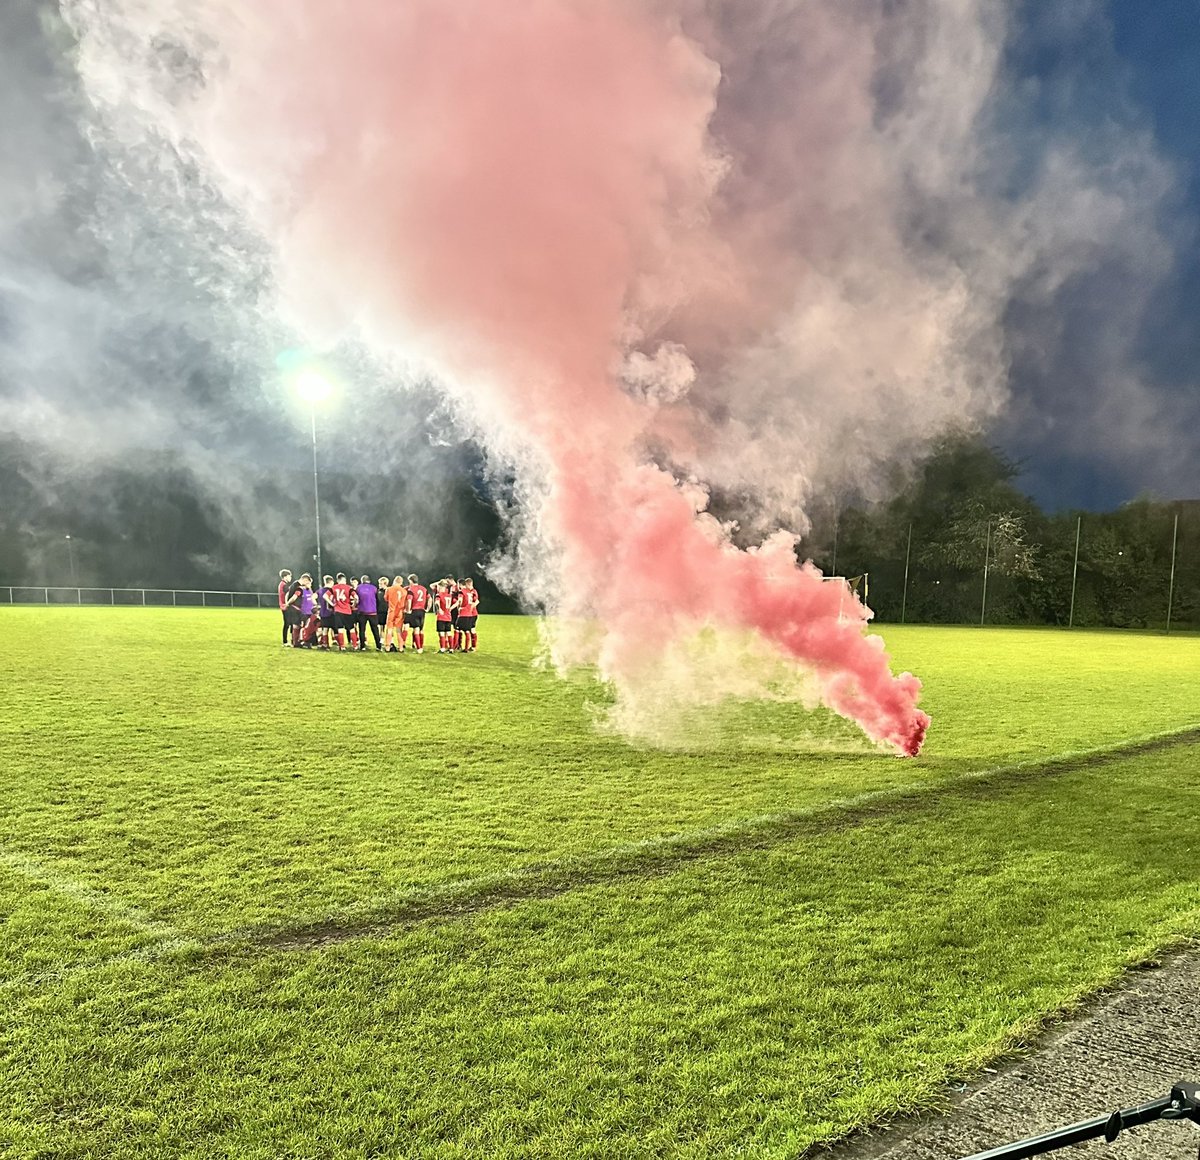 A late surge in the pyro scores with Nailsea adding a late one to go 5-0 in pyros 🧨